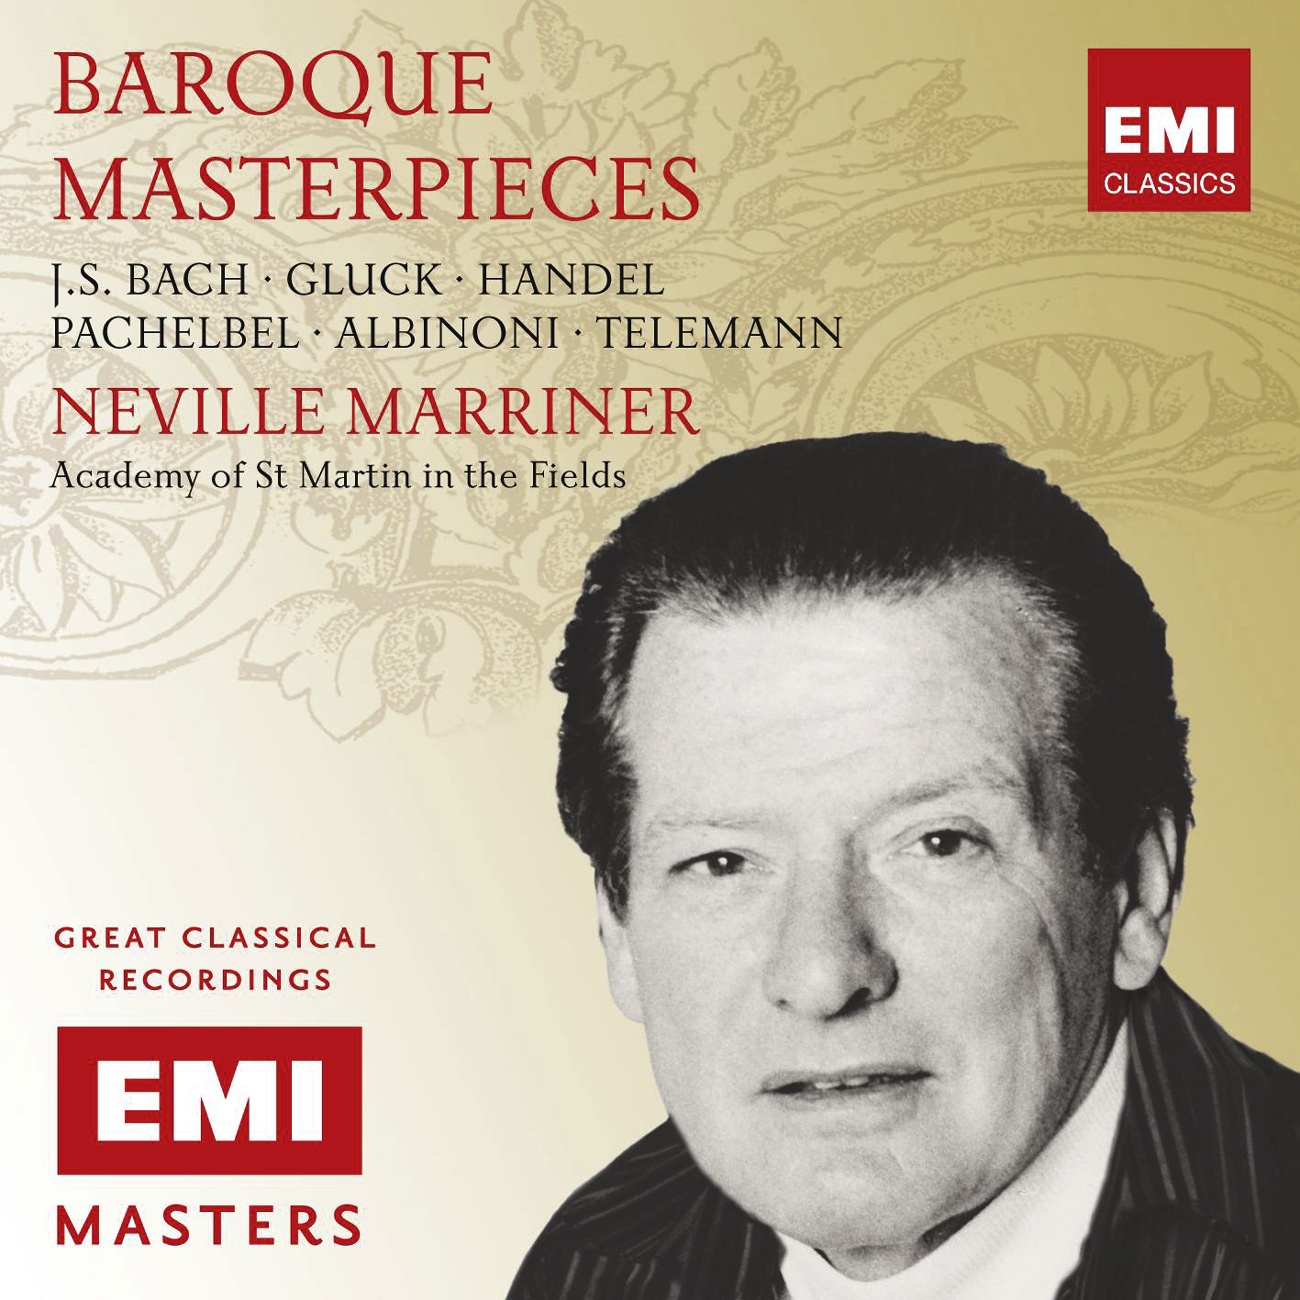 4 Orchestral Suites, BWV 1066-9, Suite No.3 in D Major, BWV 1068 (2 oboes, 3 trumpets, strings and timpani):Gigue